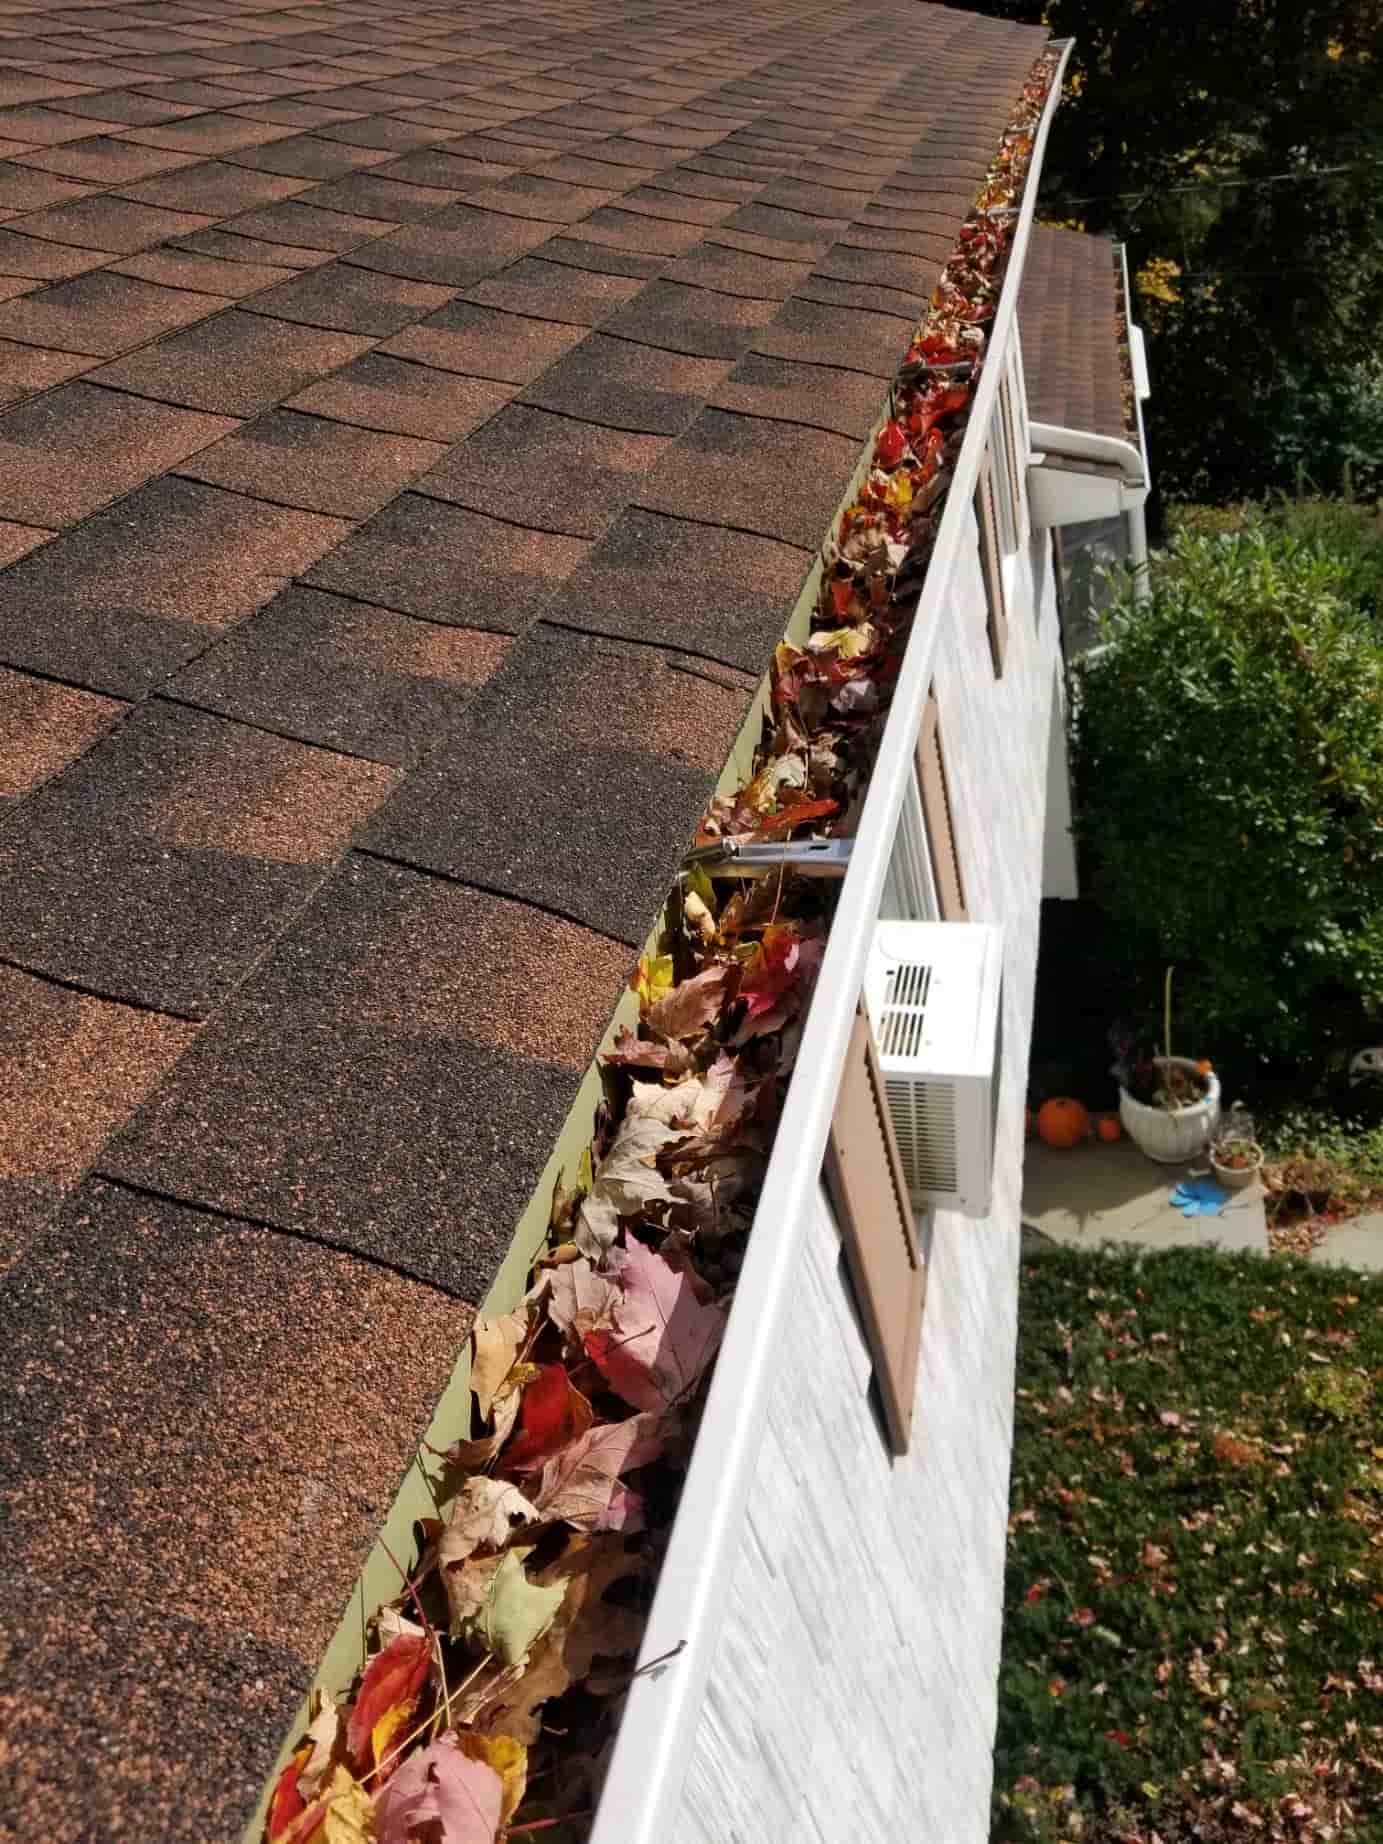 repairing gutters and downspouts